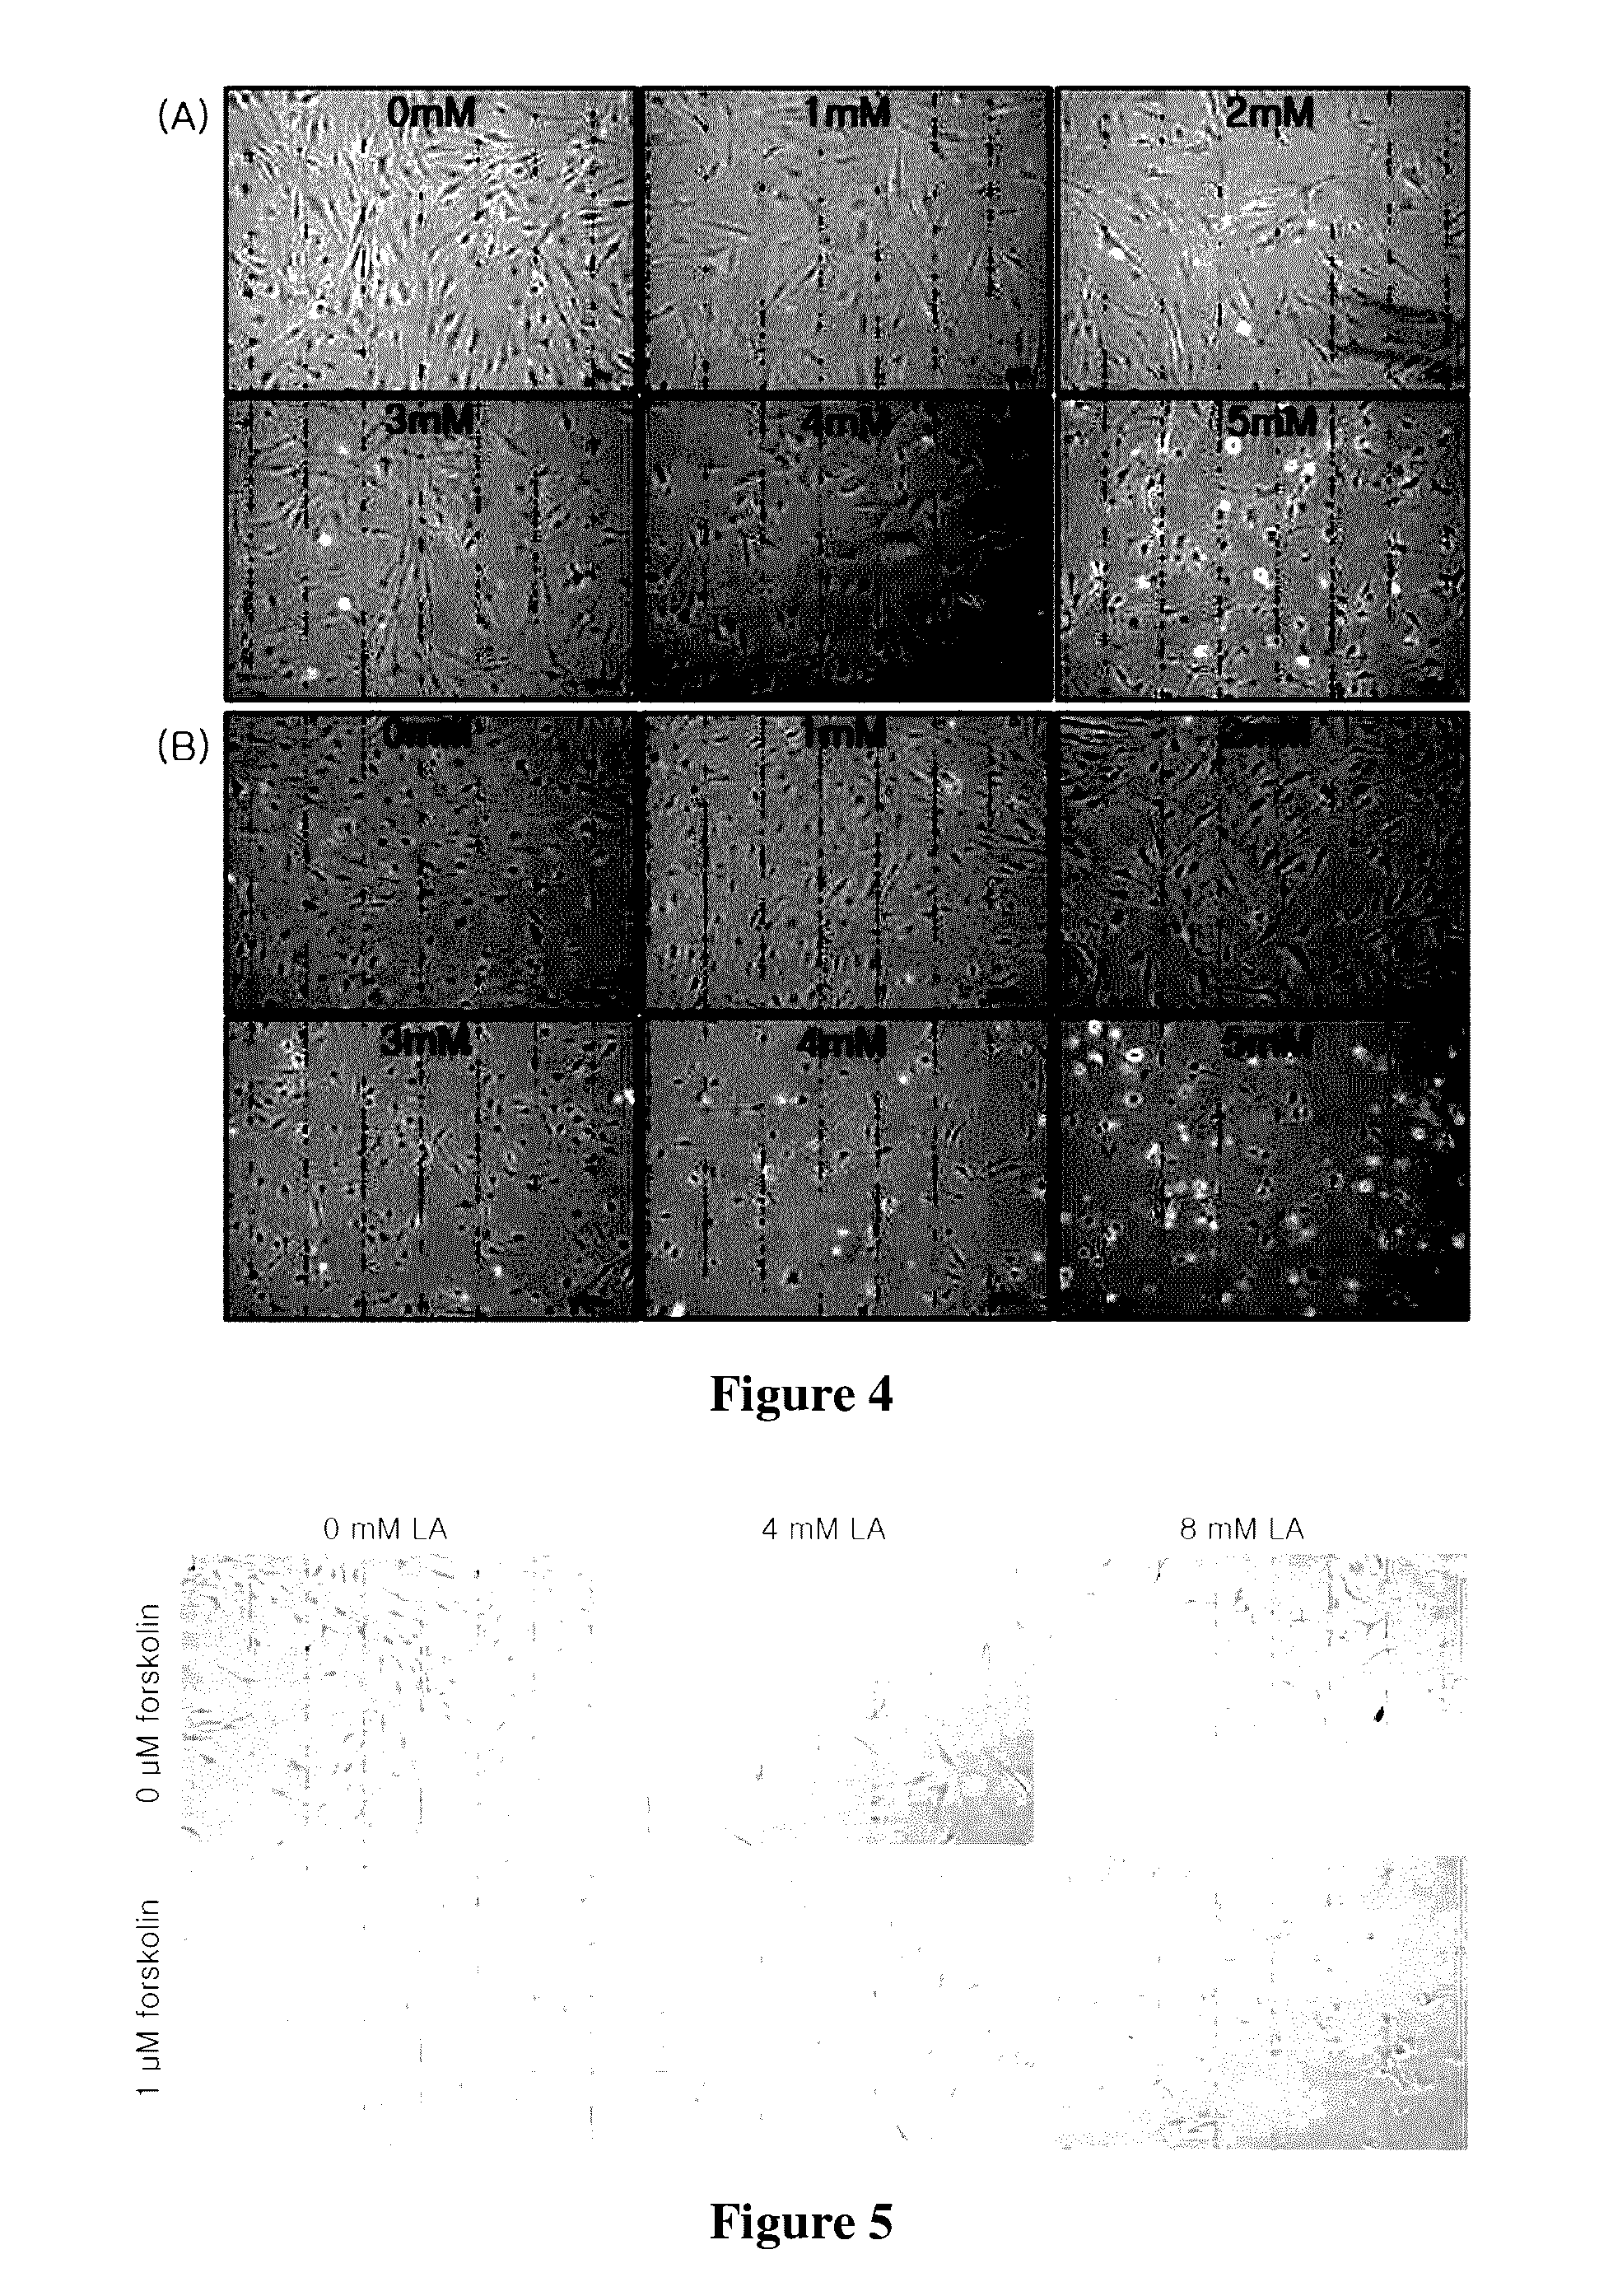 Method for differentiating stem cells into neurons